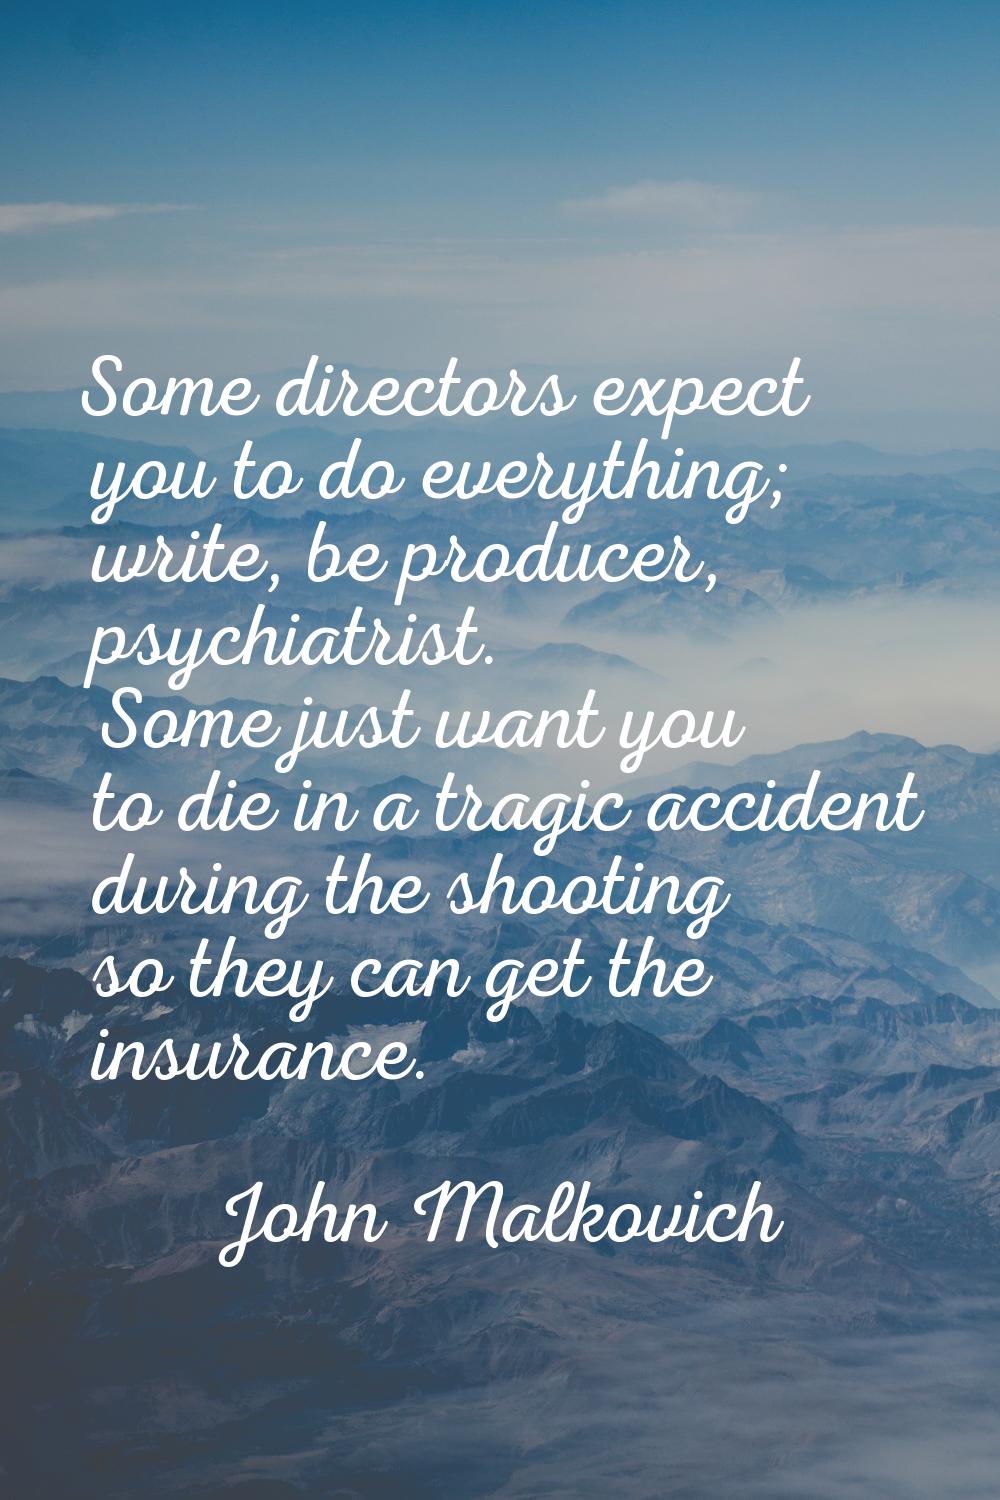 Some directors expect you to do everything; write, be producer, psychiatrist. Some just want you to